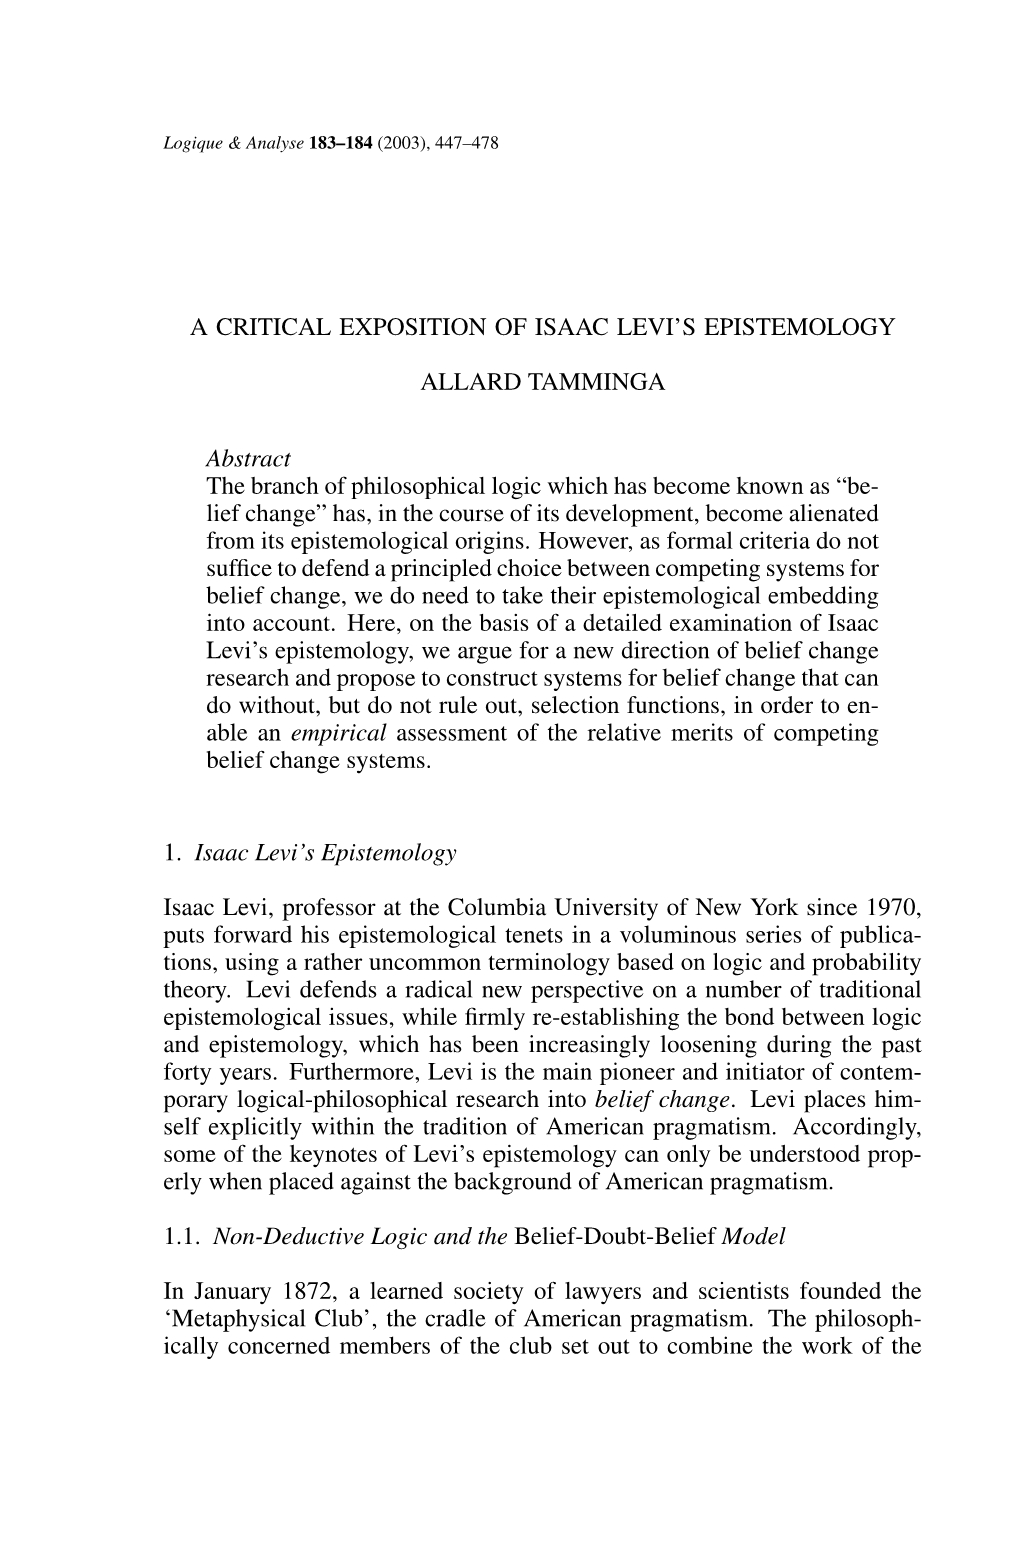 Page 447 a CRITICAL EXPOSITION of ISAAC LEVI's EPISTEMOLOGY